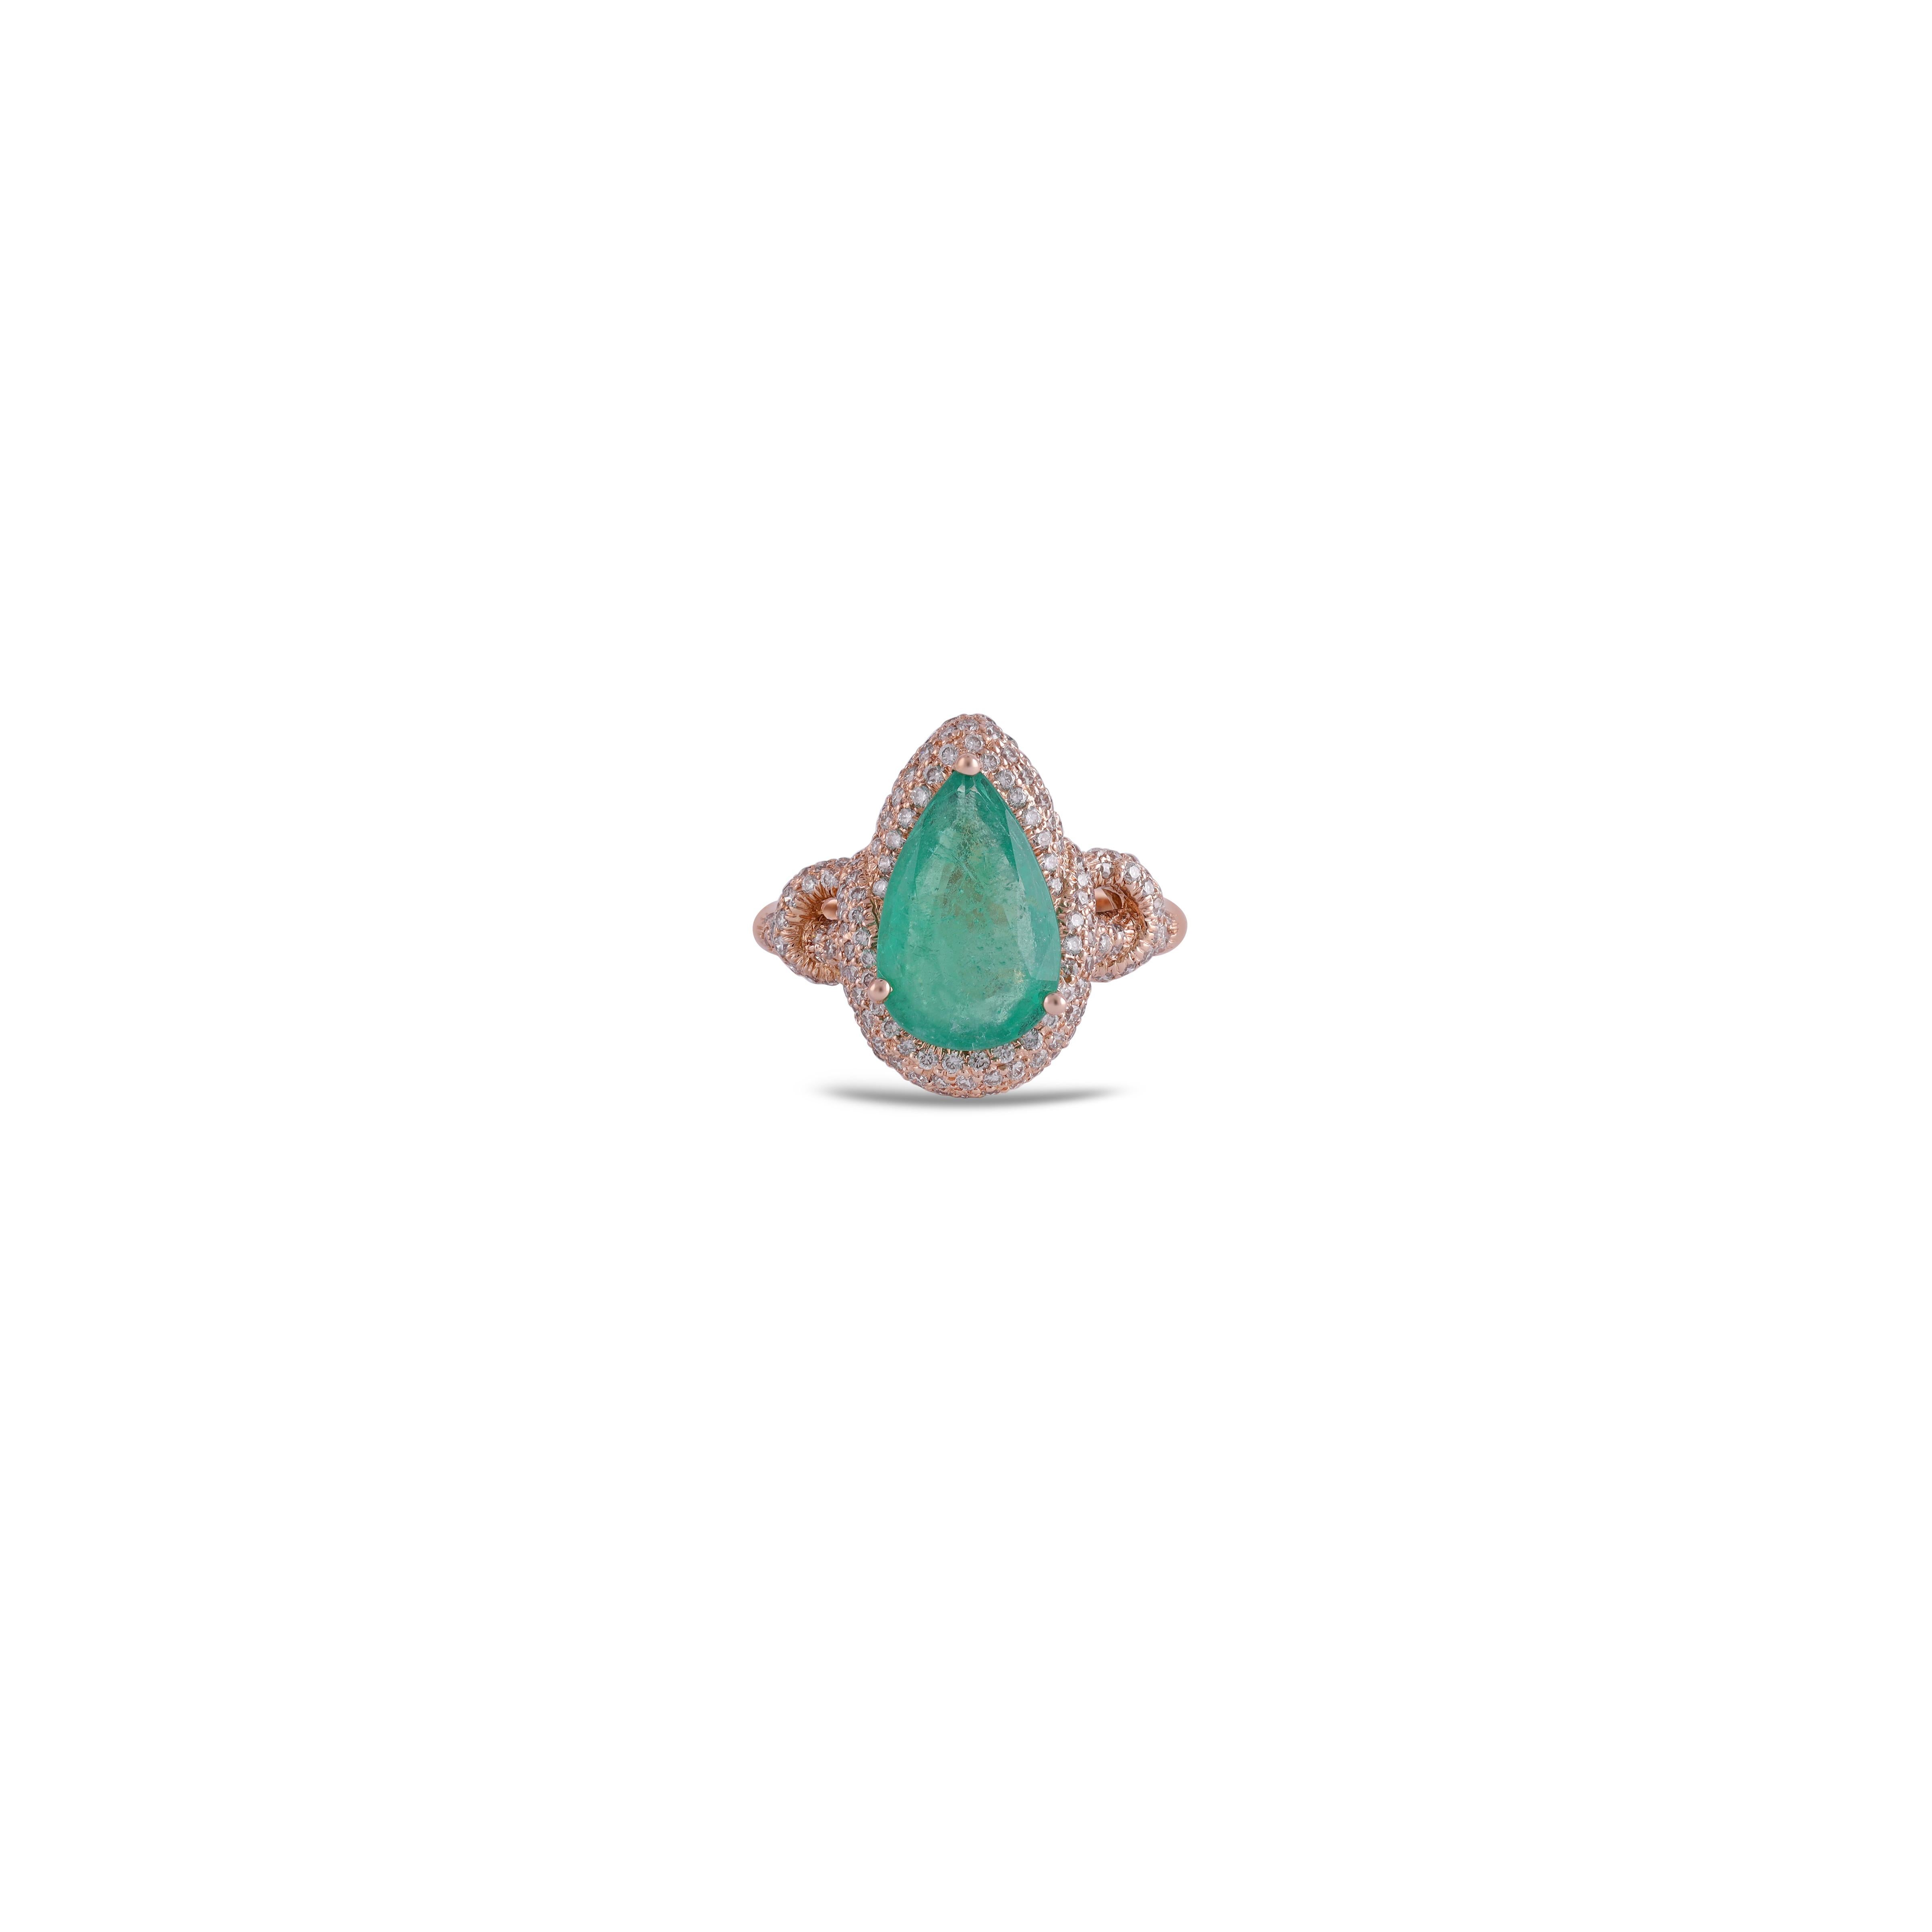 Product Details

→™ Jewelry Type - Rings
→™ Jewelry Main Material - 18K Gold, 18K Gold

Stone Details
→™ Primary Stone Type: Emerald  
→™ Primary Stone Details: Oiled
→™ Primary Stone Count: 1
→™ Total Primary Stone Carat Weight: 2.75